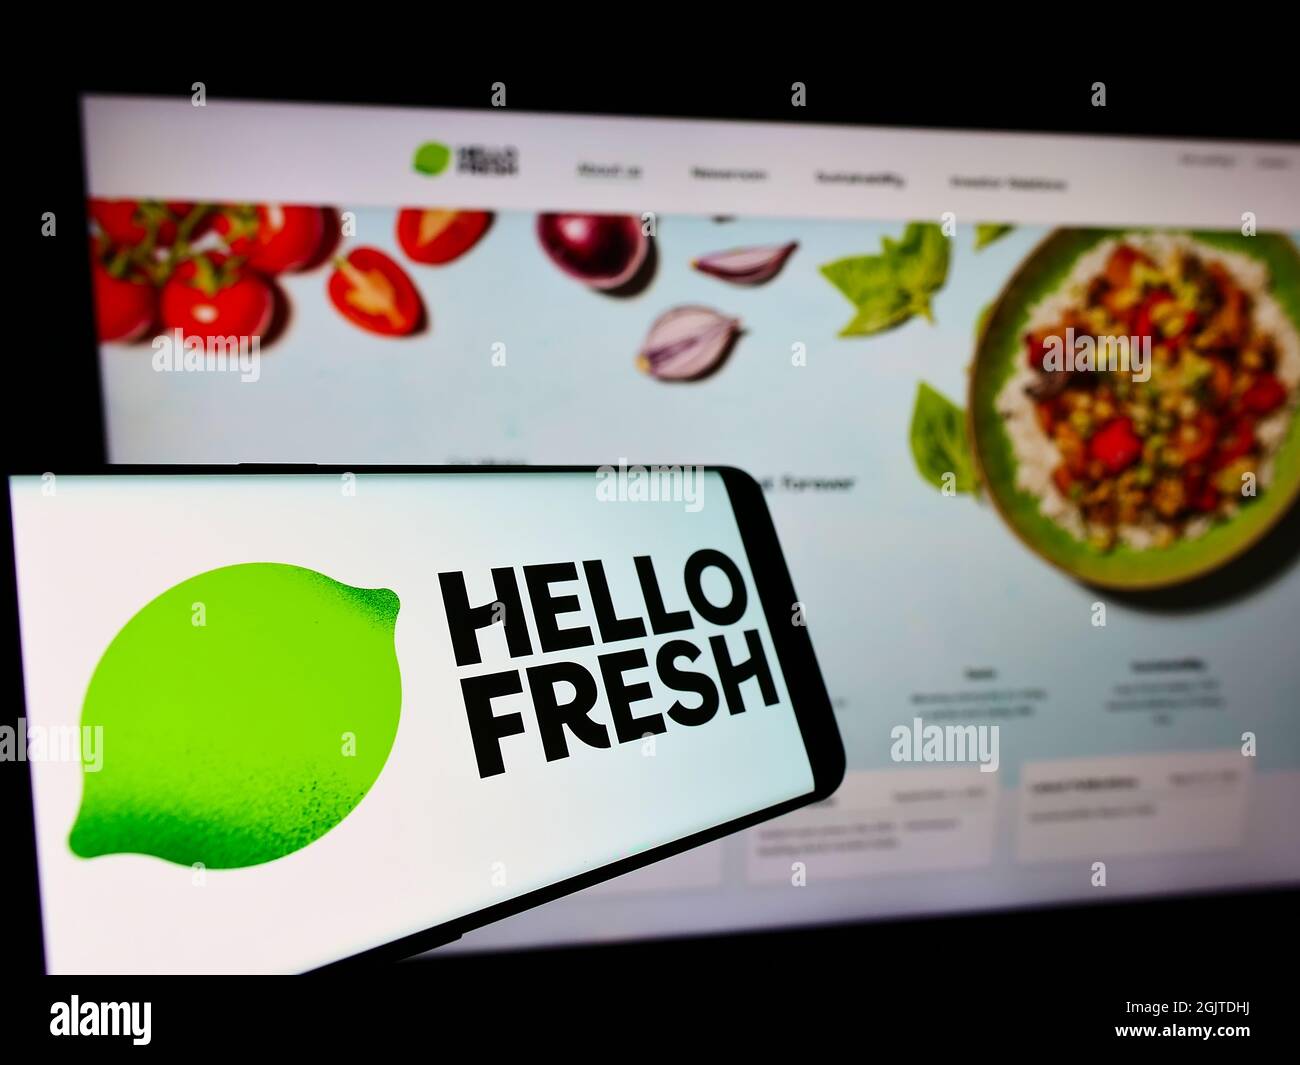 Cellphone with logo of German meal-kit company HelloFresh SE on screen in front of business website. Focus on center-right of phone display. Stock Photo